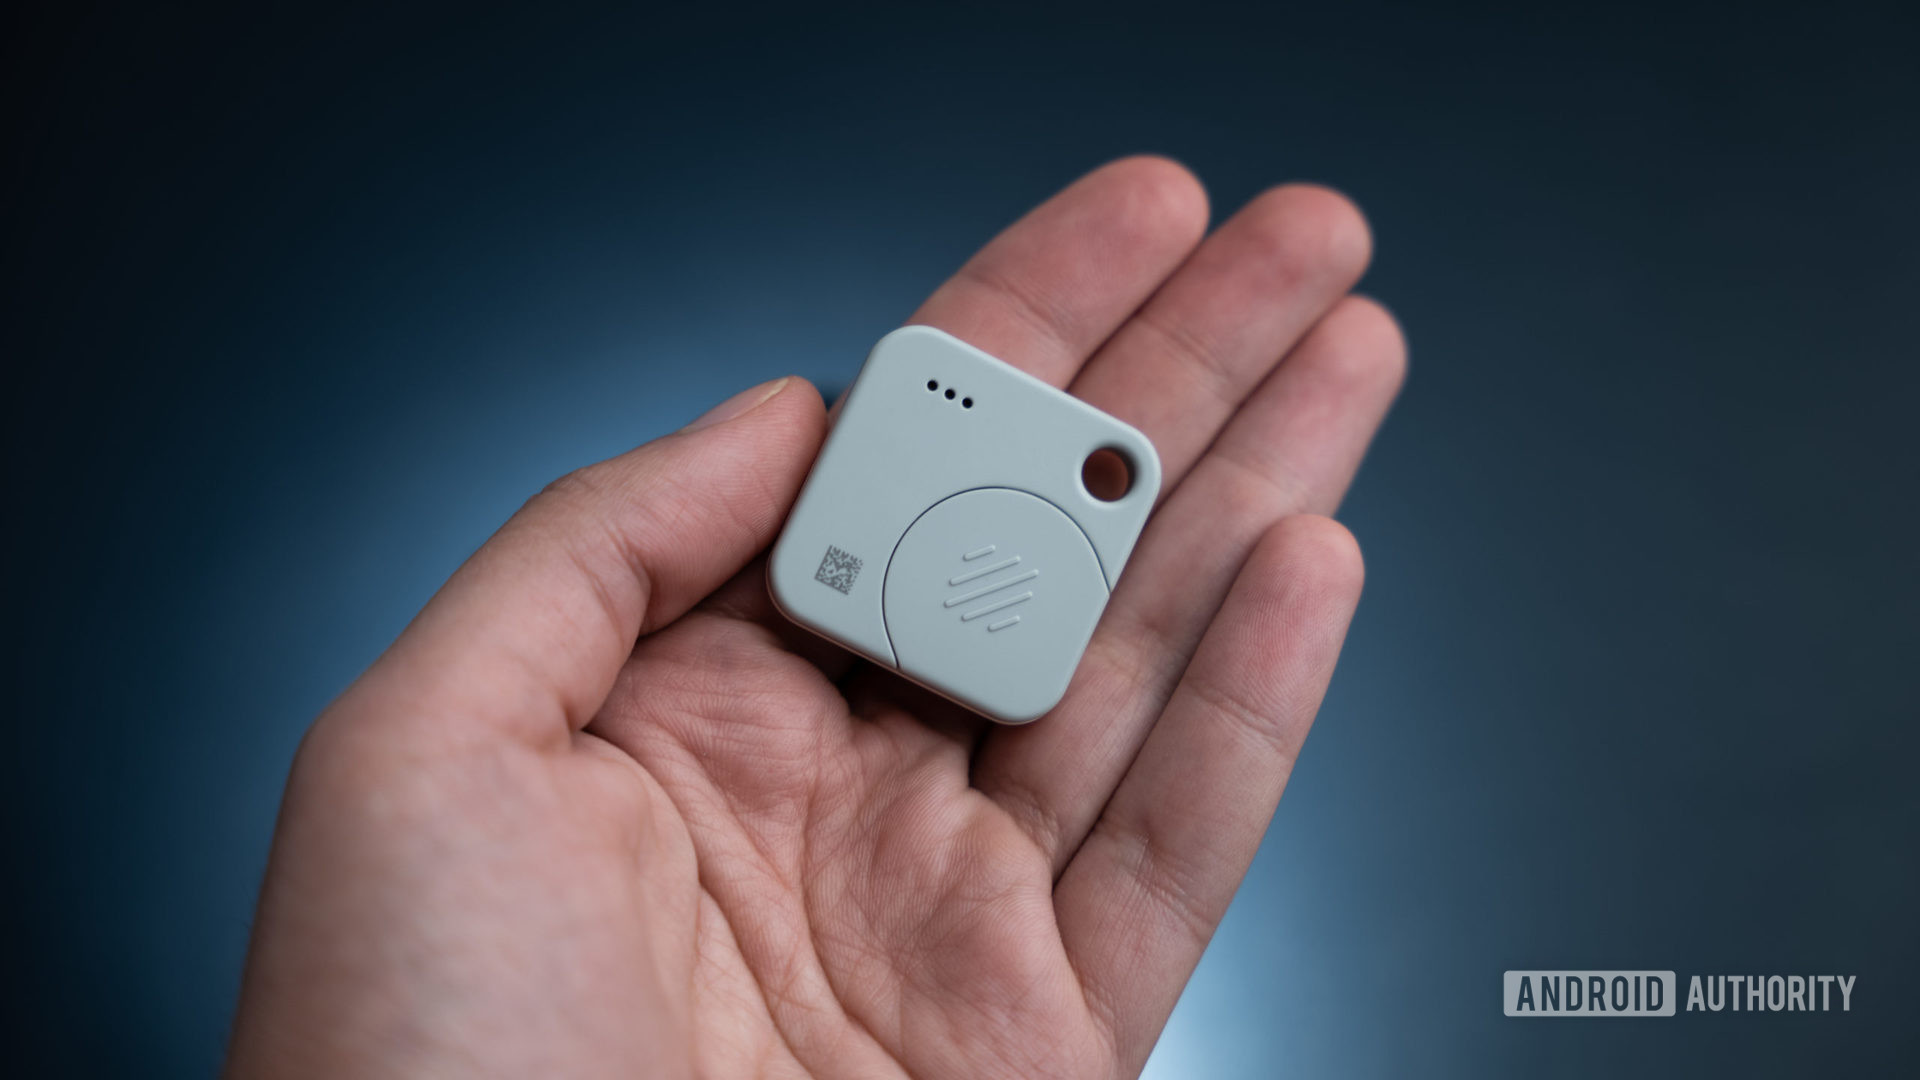 The Tile Mate Tracker rear view in hand showing the battery compartment.